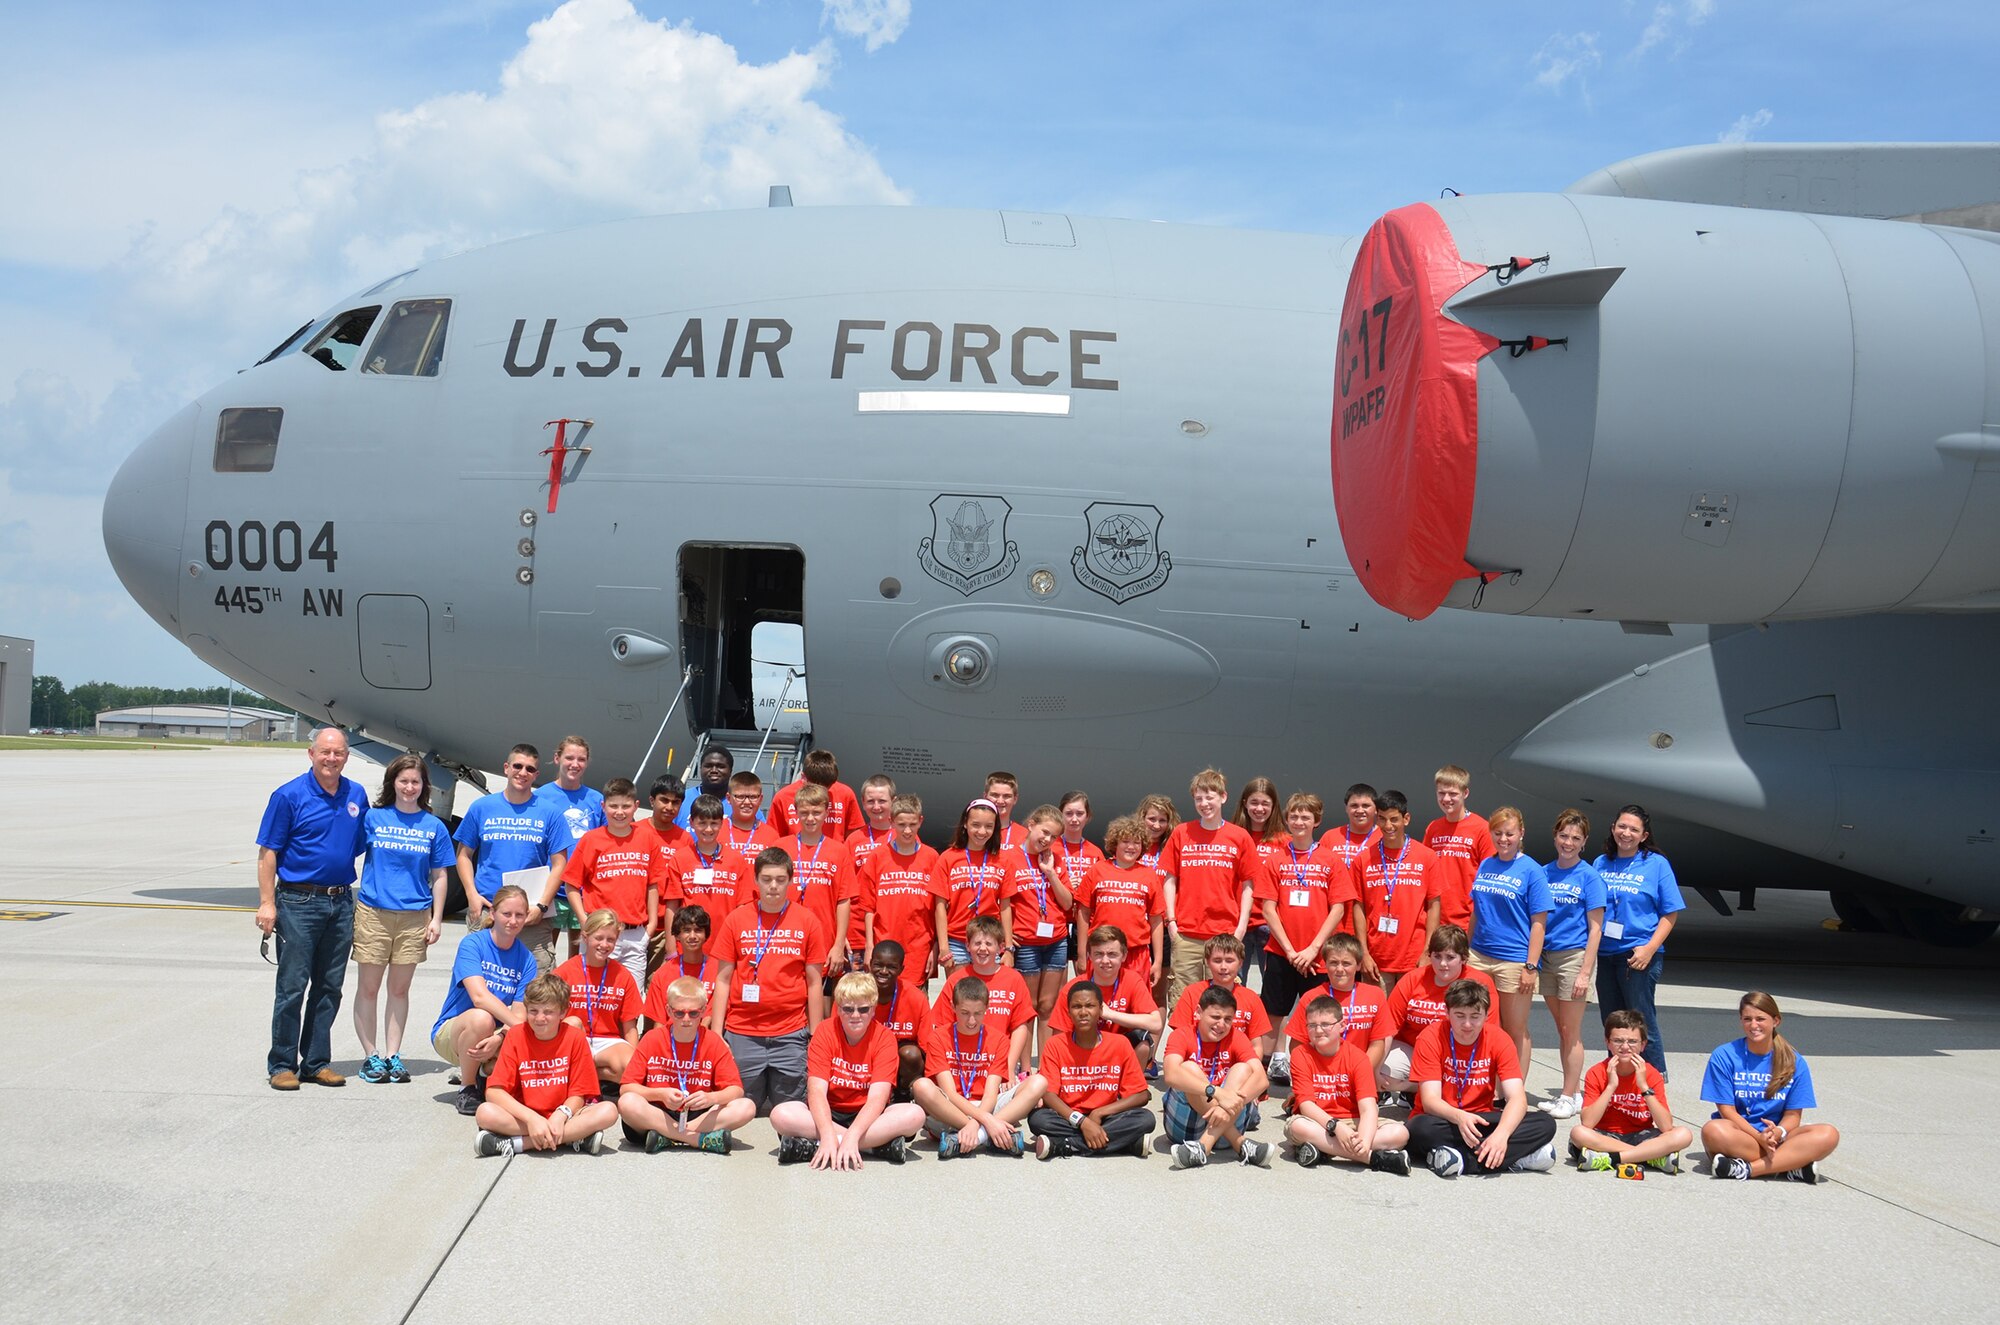 WRIGHT-PATTERSON AIR FORCE BASE, Ohio – Students participating in the 2013 Air Camp program toured a C-17 Globemaster III during their visit to the 445th Airlift Wing June 17 Air Camp is a week-long summer camp for middle school students to learn about aviation and the science, technology, engineering and mathematics of aeronautics. The program is the vision of Dayton-area leaders who want to help young people nationwide achieve their potential, develop critical-thinking and problem-solving skills, and pursue further education and future careers in STEM-related fields and aviation. (U.S. Air Force photo/Master Sgt. Charles Miller)